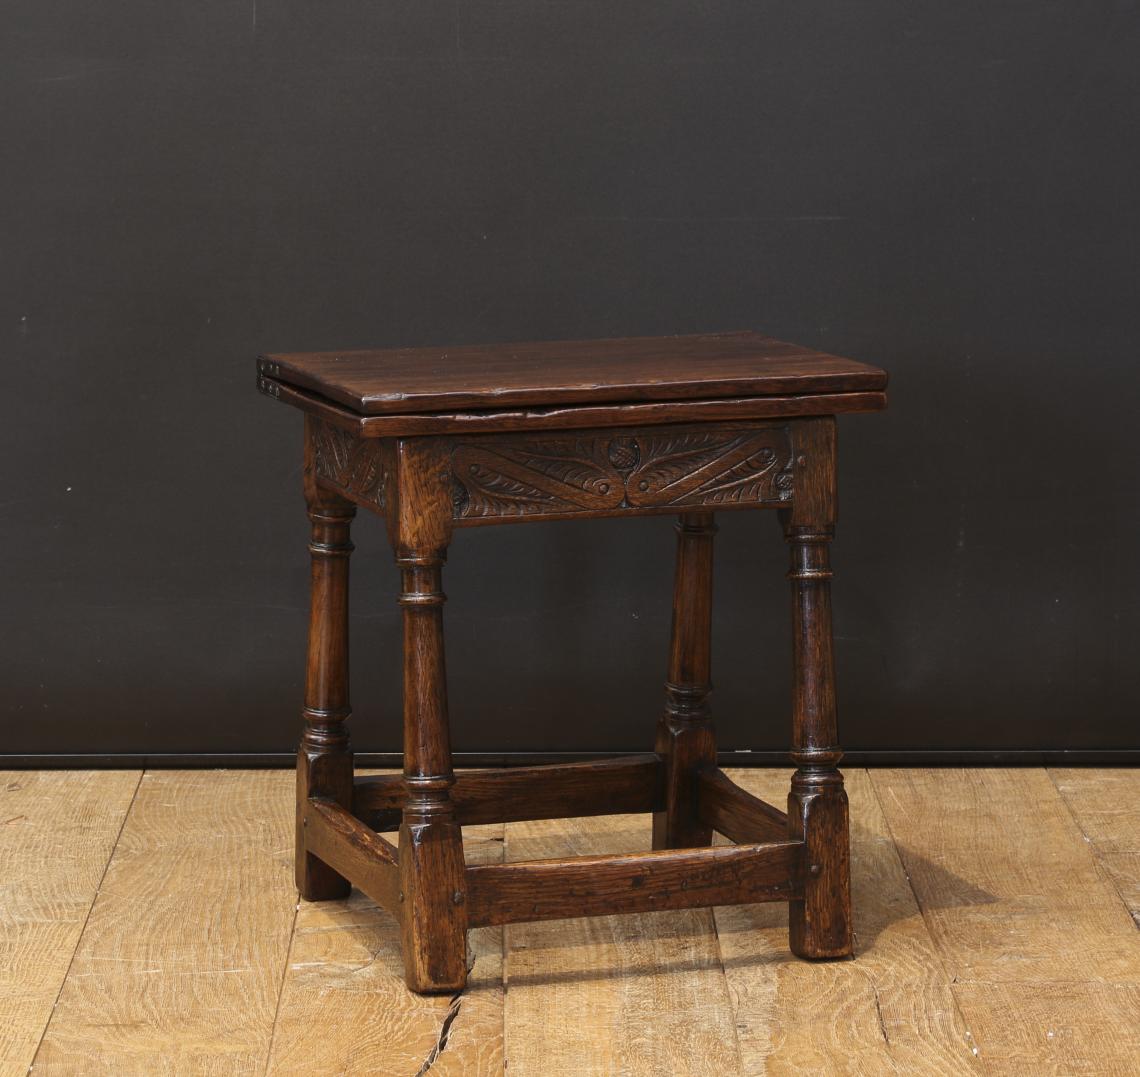 Jointed Stool with Hinged Top